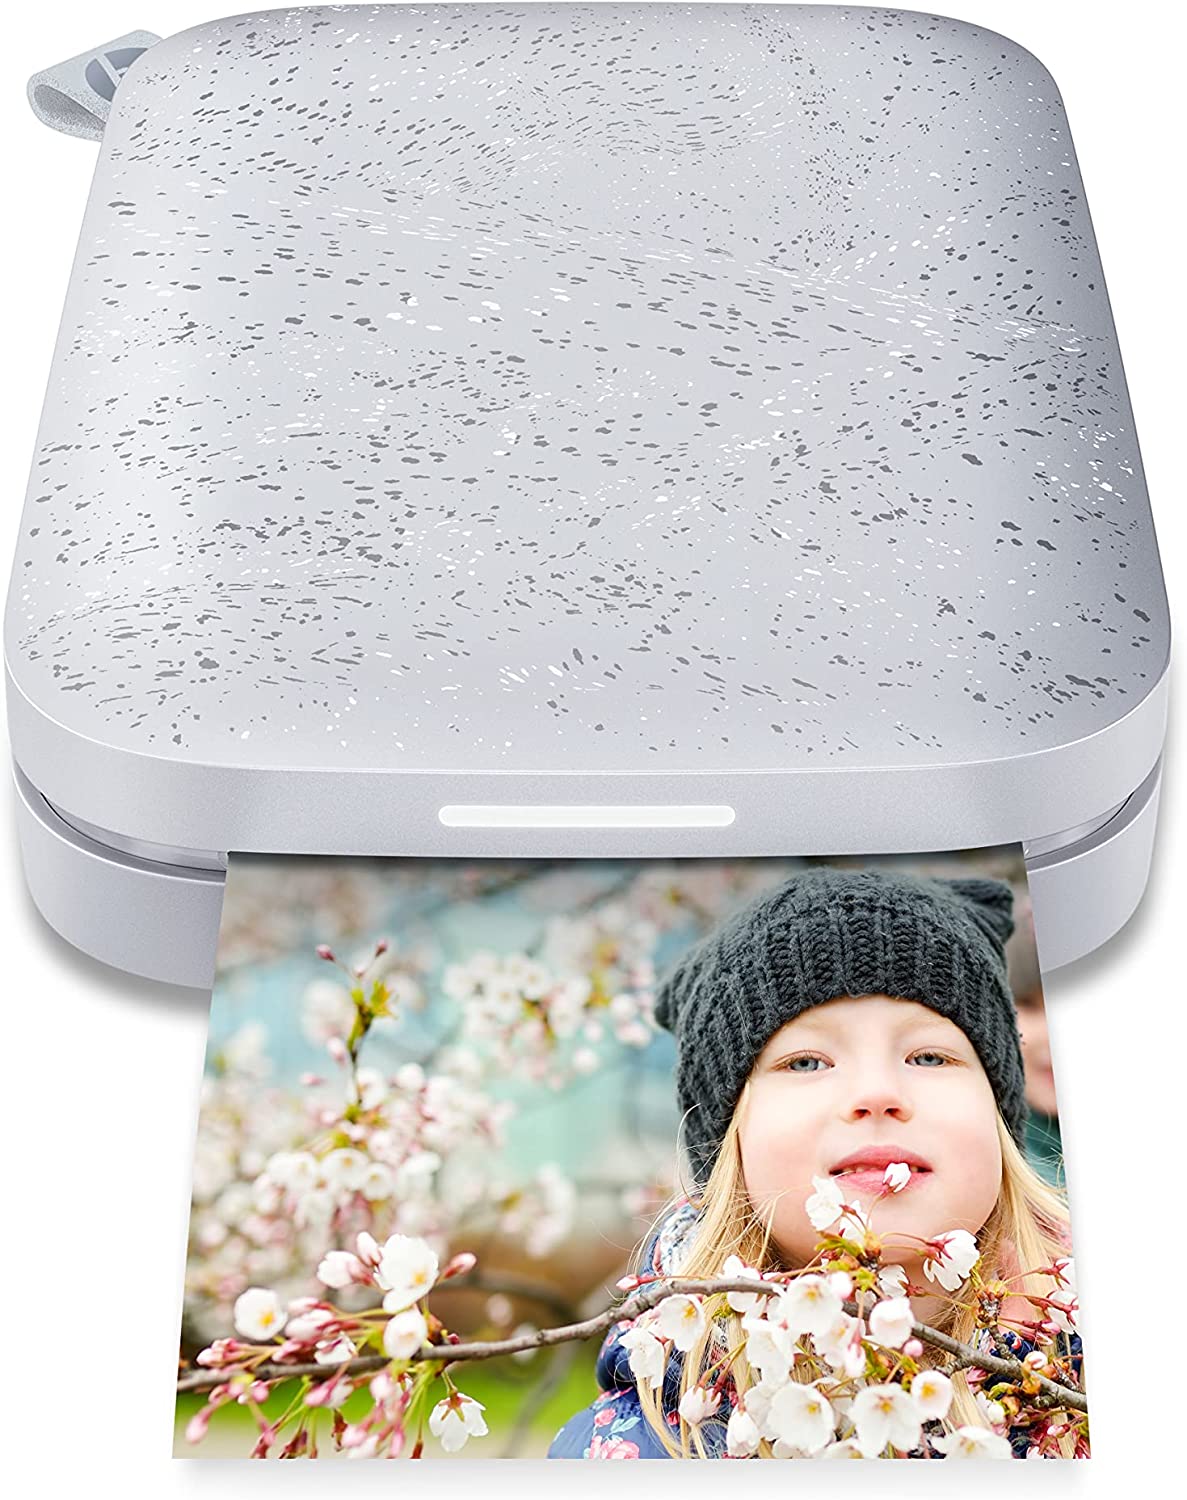 HP Sprocket Portable Printer, Zink Sticky Paper 2x3&#x22; Instant Photo Printer for iOS &#x26; Android Device